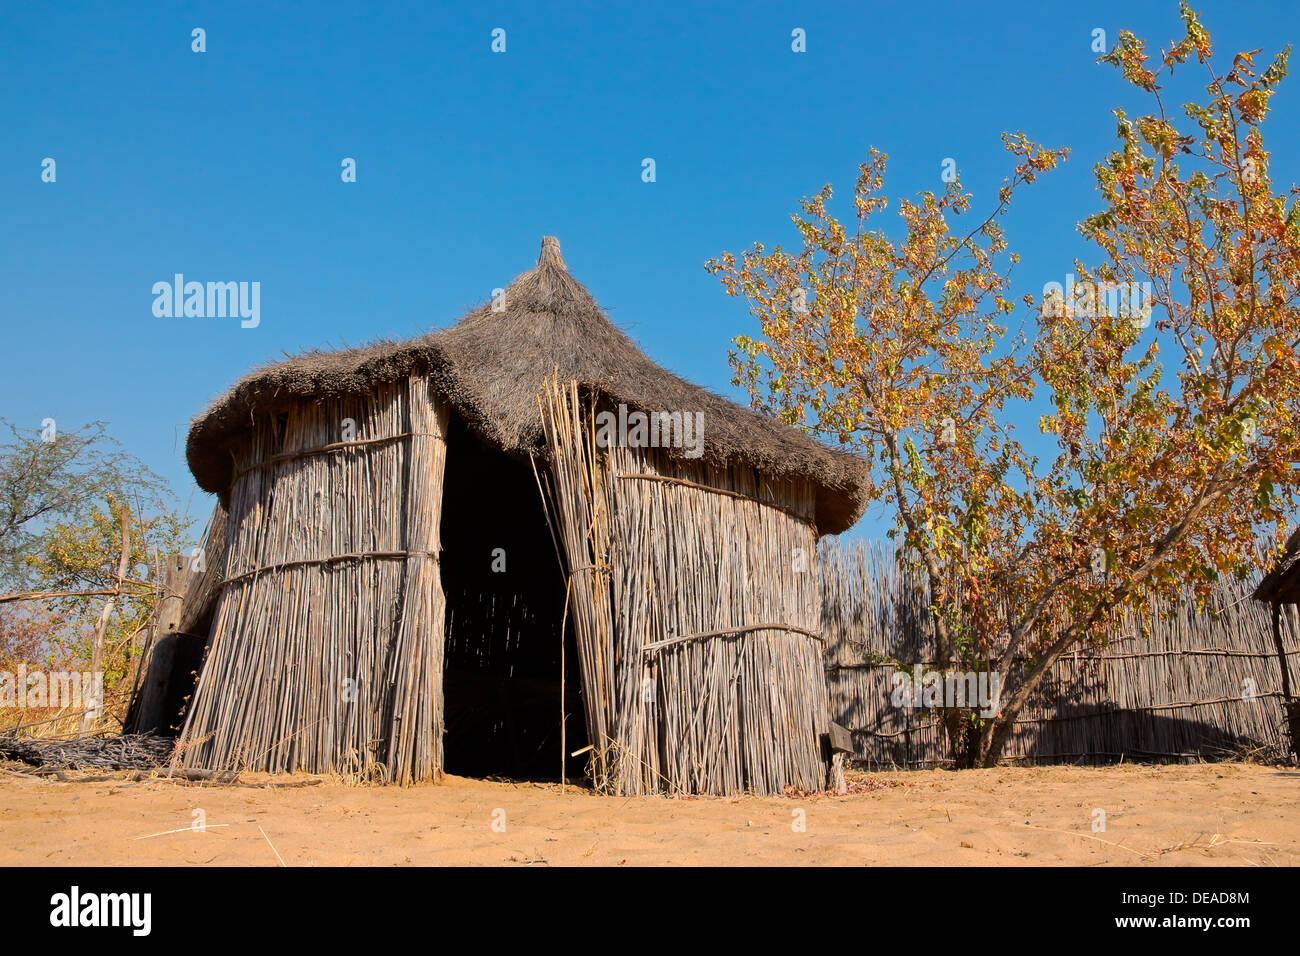 Traditional rural African reed and thatch hut, Caprivi region, Namibia Stock Photo